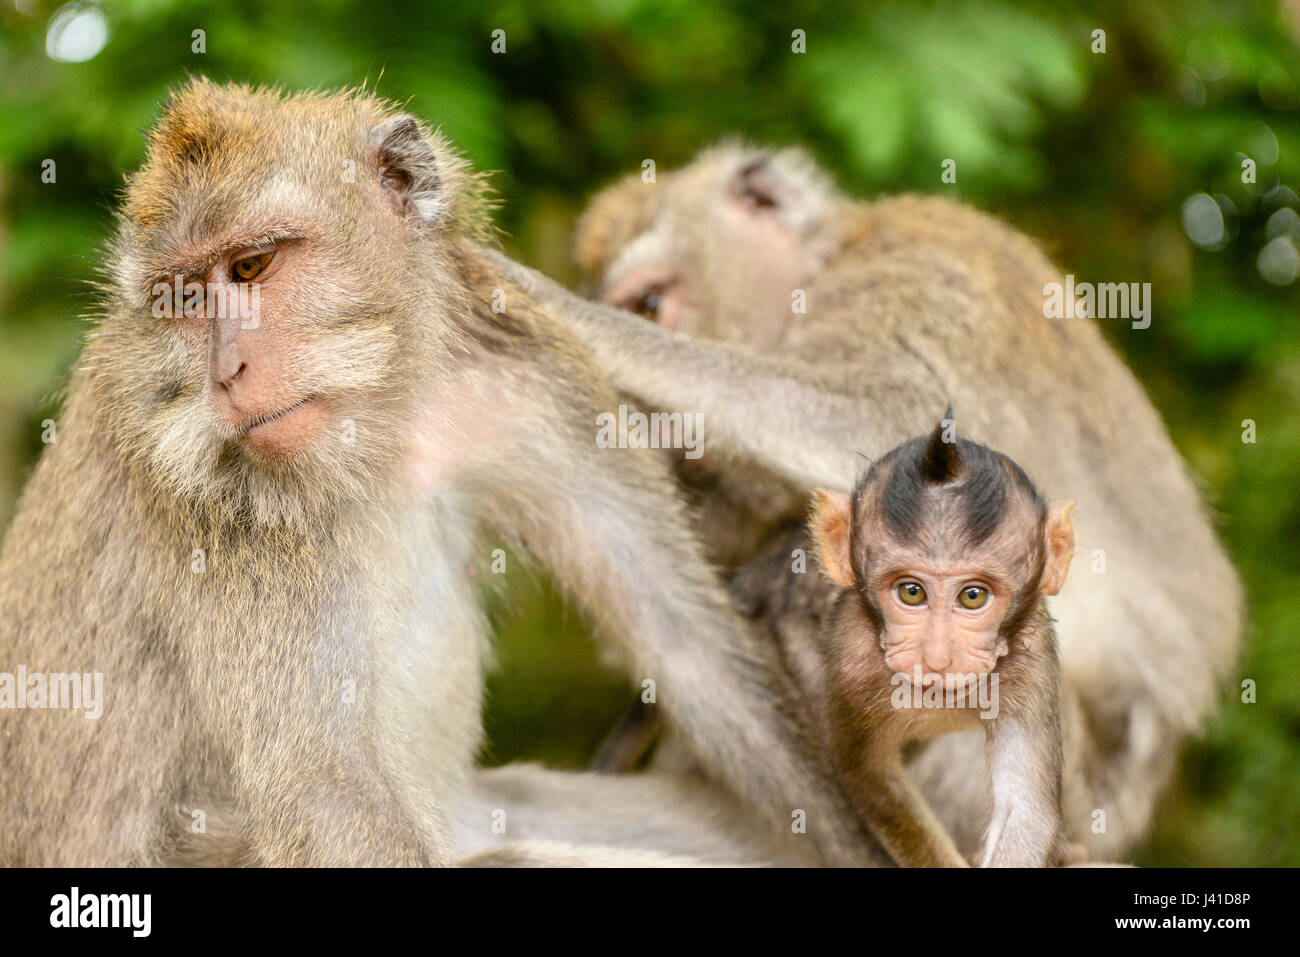 Monkey family Cynomolgus monkey Macaca fascicularis with child during grooming in the city temples of Ubud, Bali, Indonesia Stock Photo